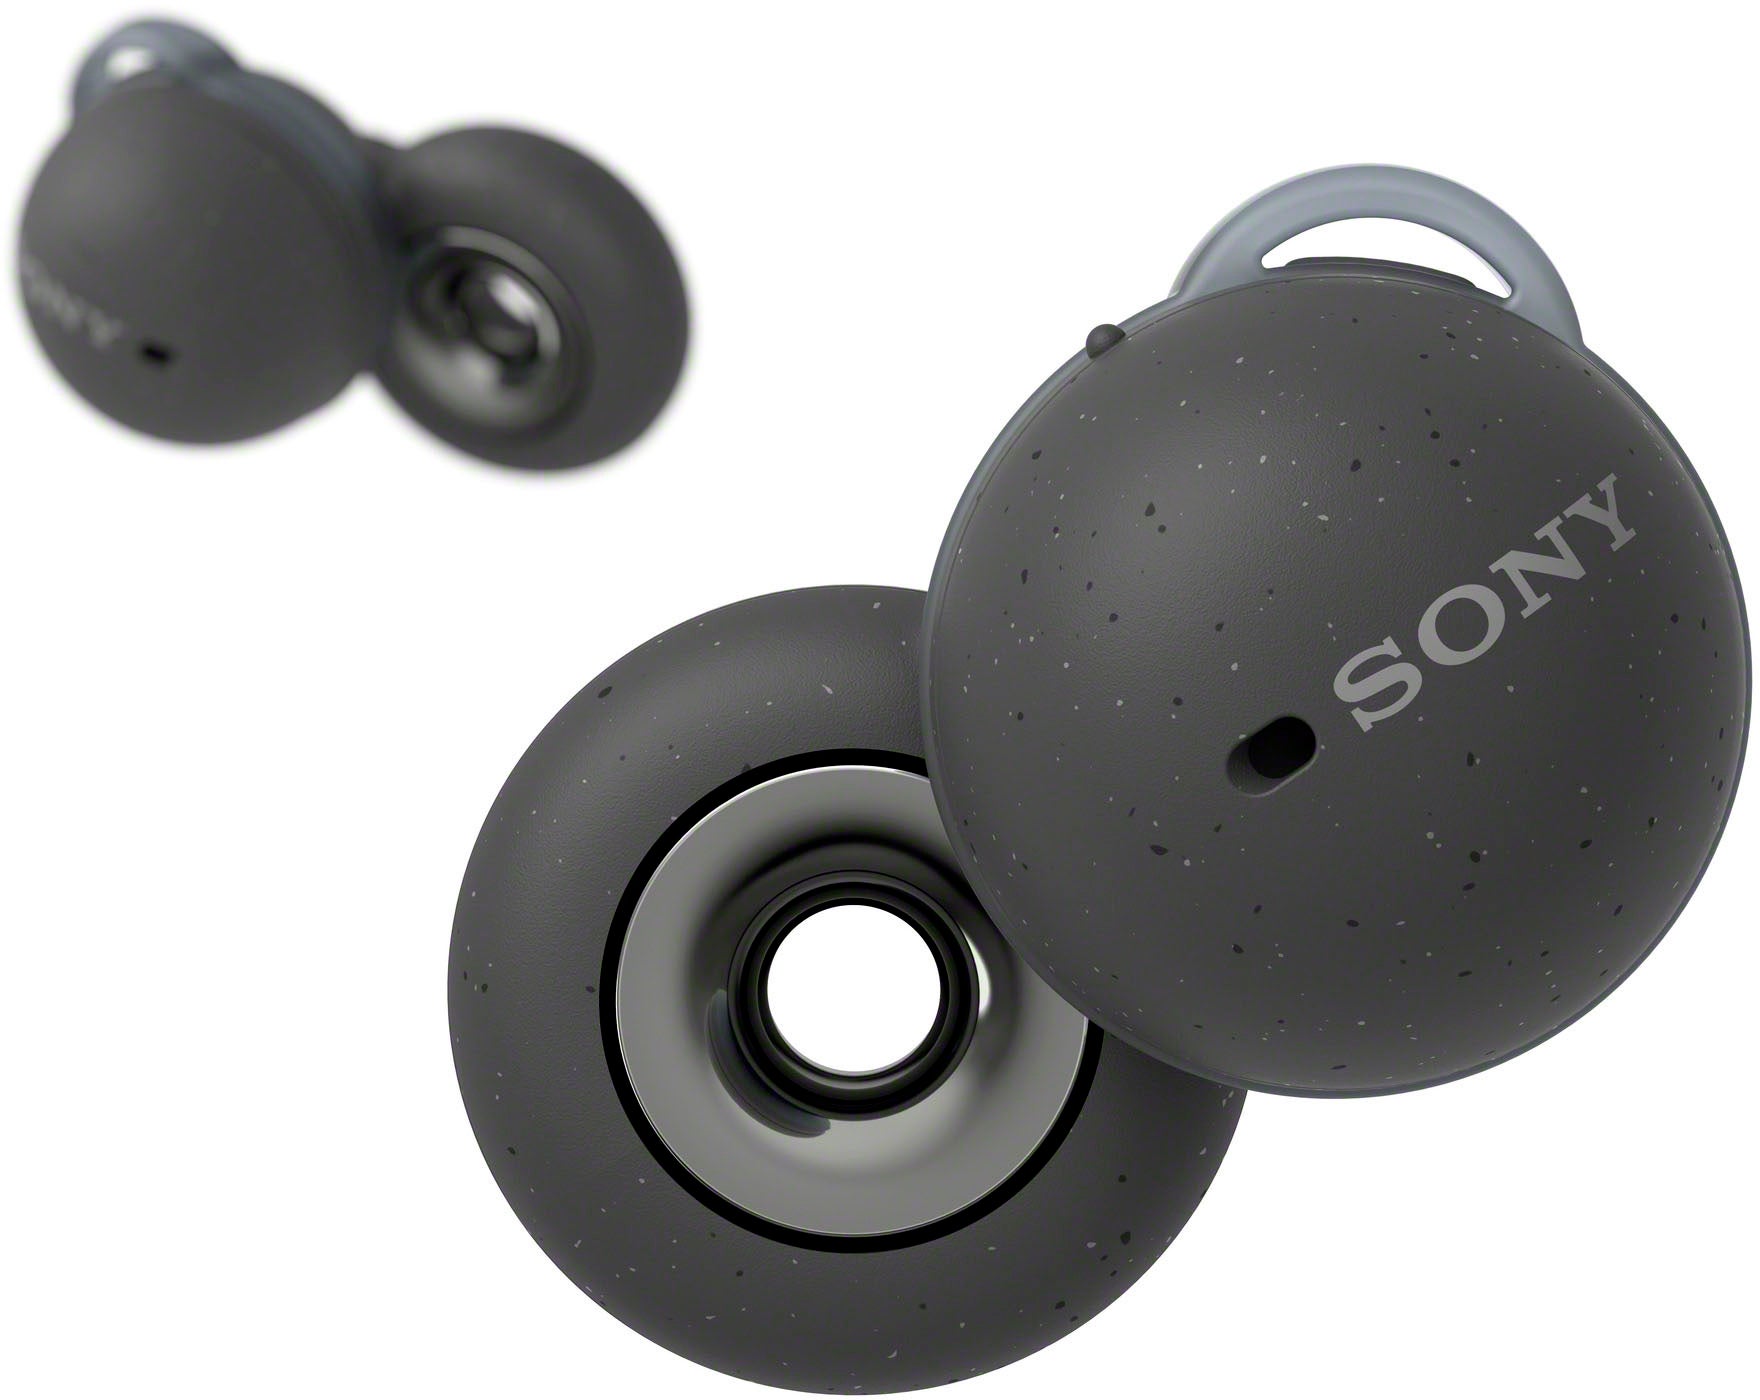 Leak shows Linkbuds WF-L900, possible Sony wireless earbuds with a distinctive design